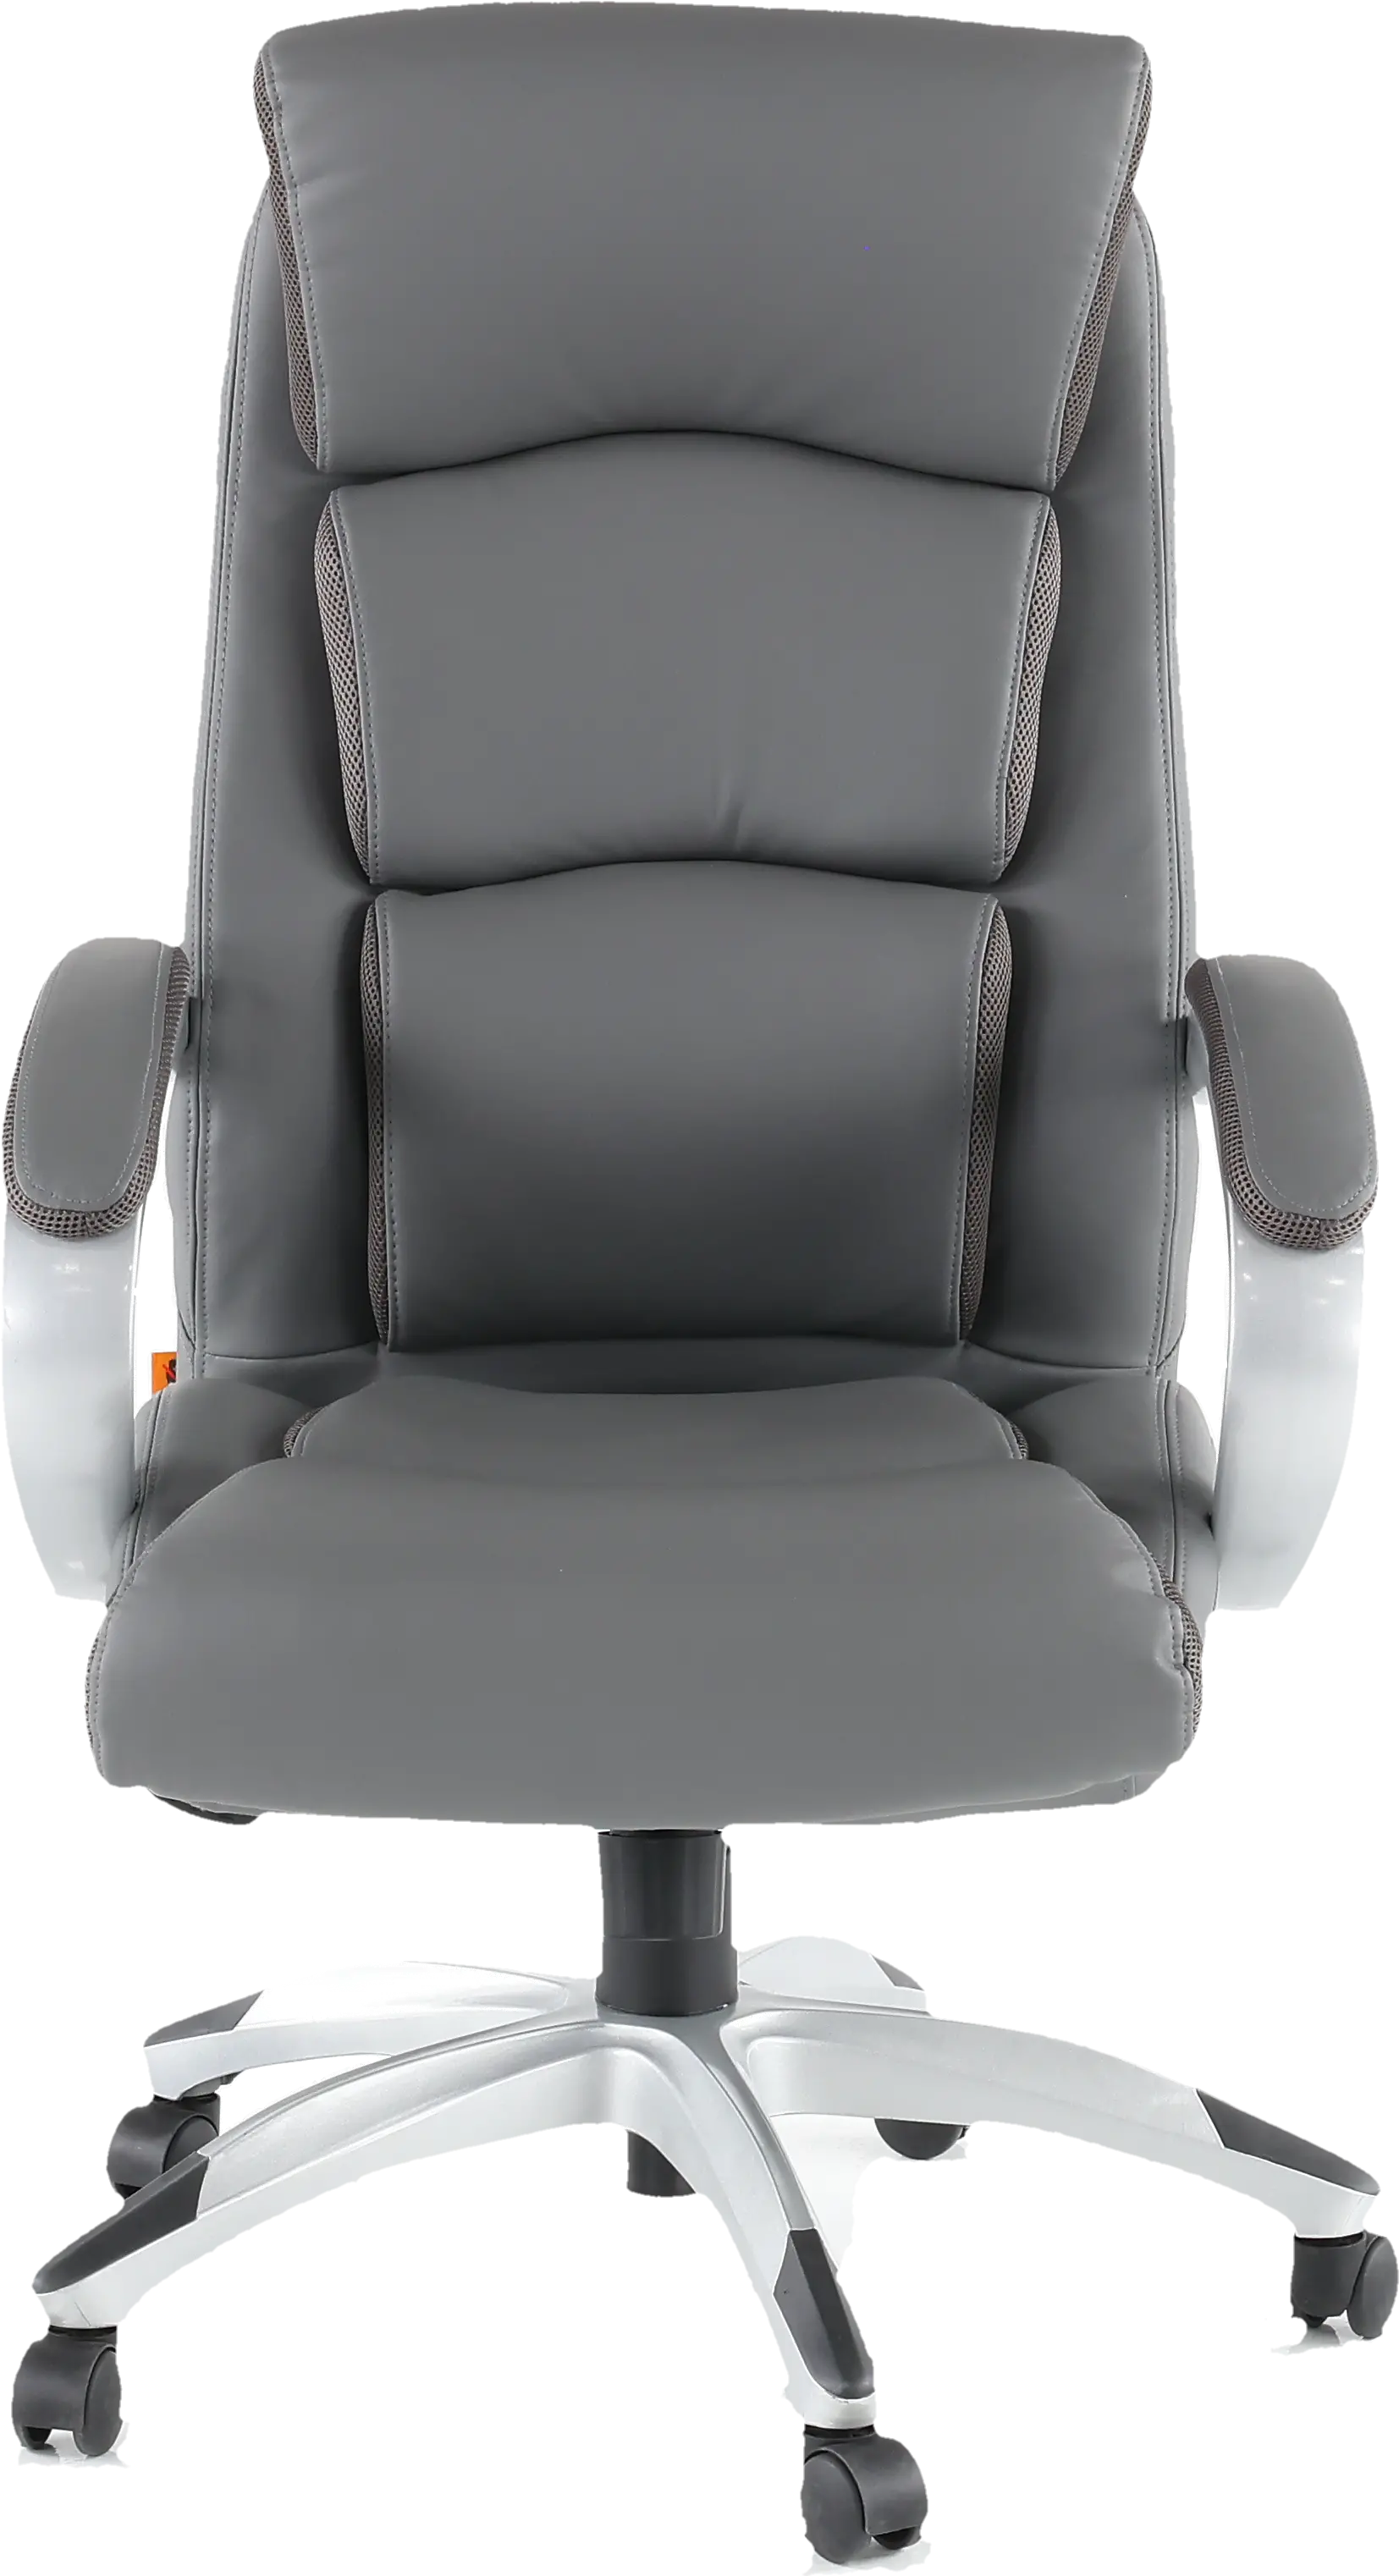 https://static.rcwilley.com/products/4006518/Gray-LeatherPlus-Executive-Office-Chair-rcwilley-image1.webp